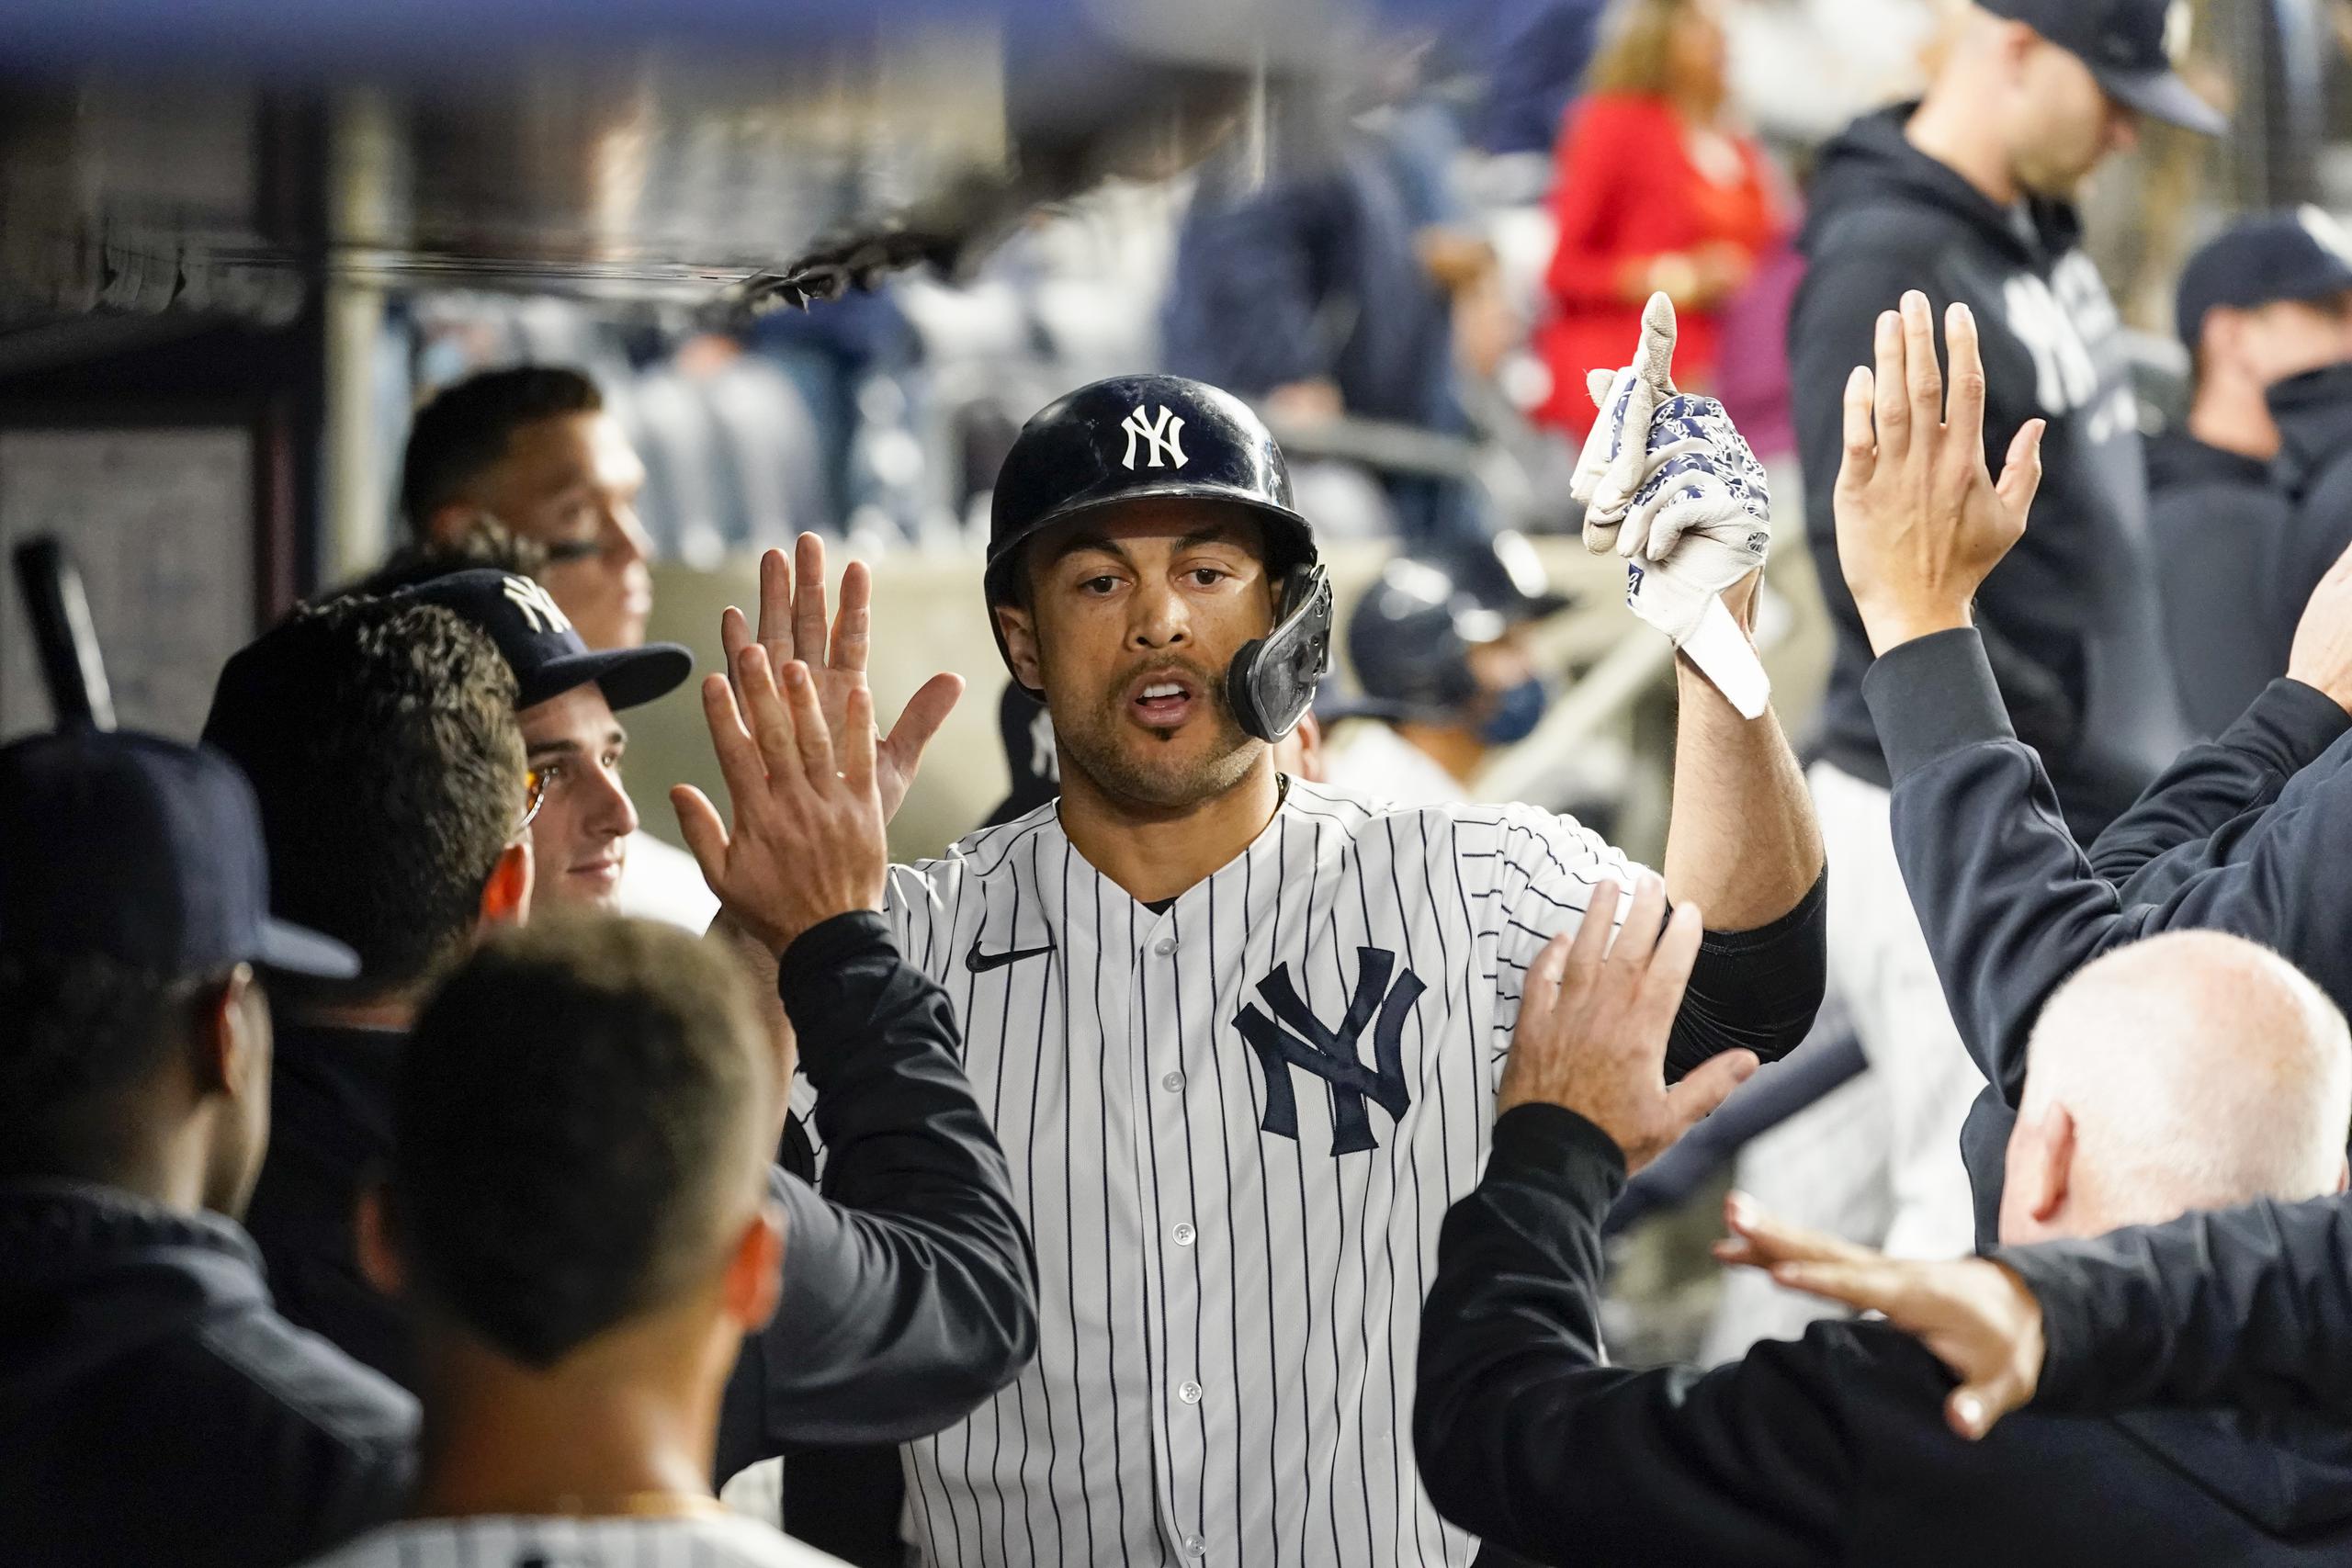 New York Yankees' Giancarlo Stanton celebrates with his teammates after scoring off a bunt by Joey Gallo in the ninth inning of a baseball game against the Tampa Bay Rays, Friday, Oct. 1, 2021, in New York. The Rays won 4-3. (AP Photo/Mary Altaffer)